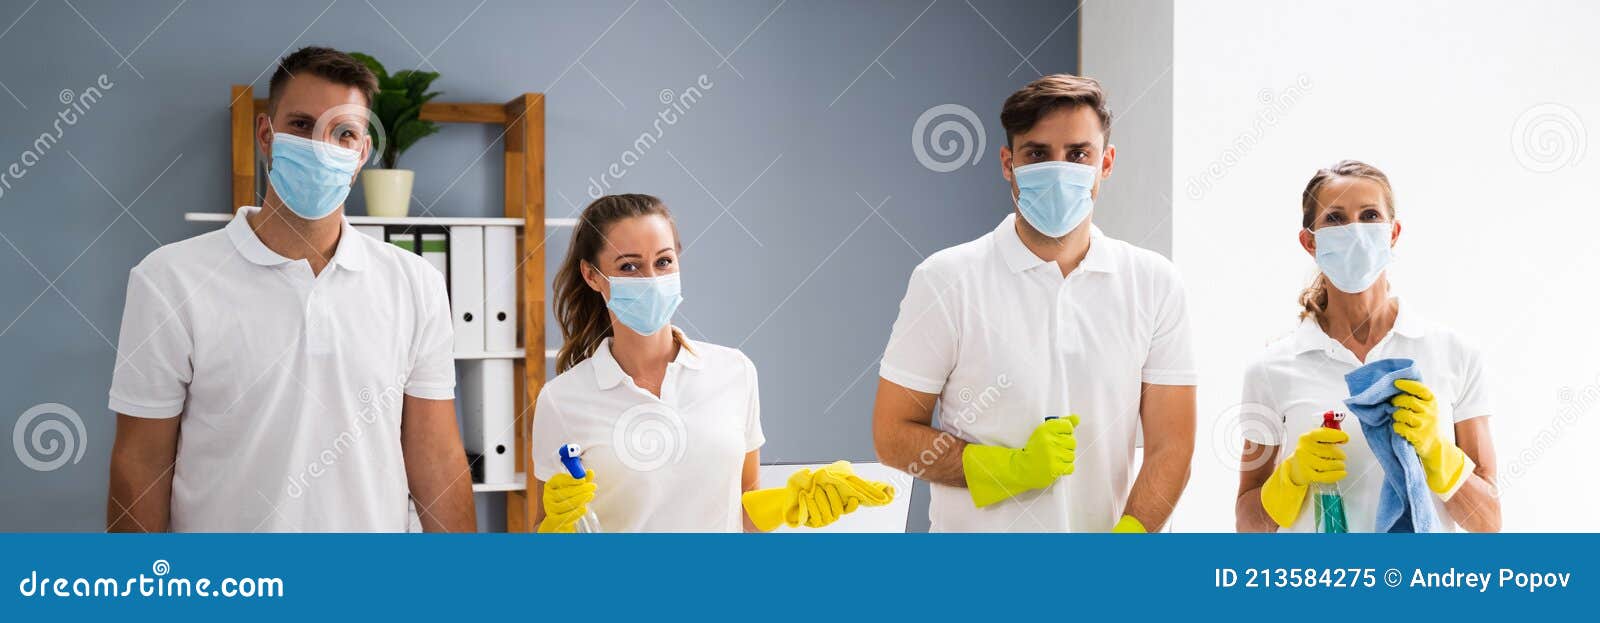 young commercial cleaning team people